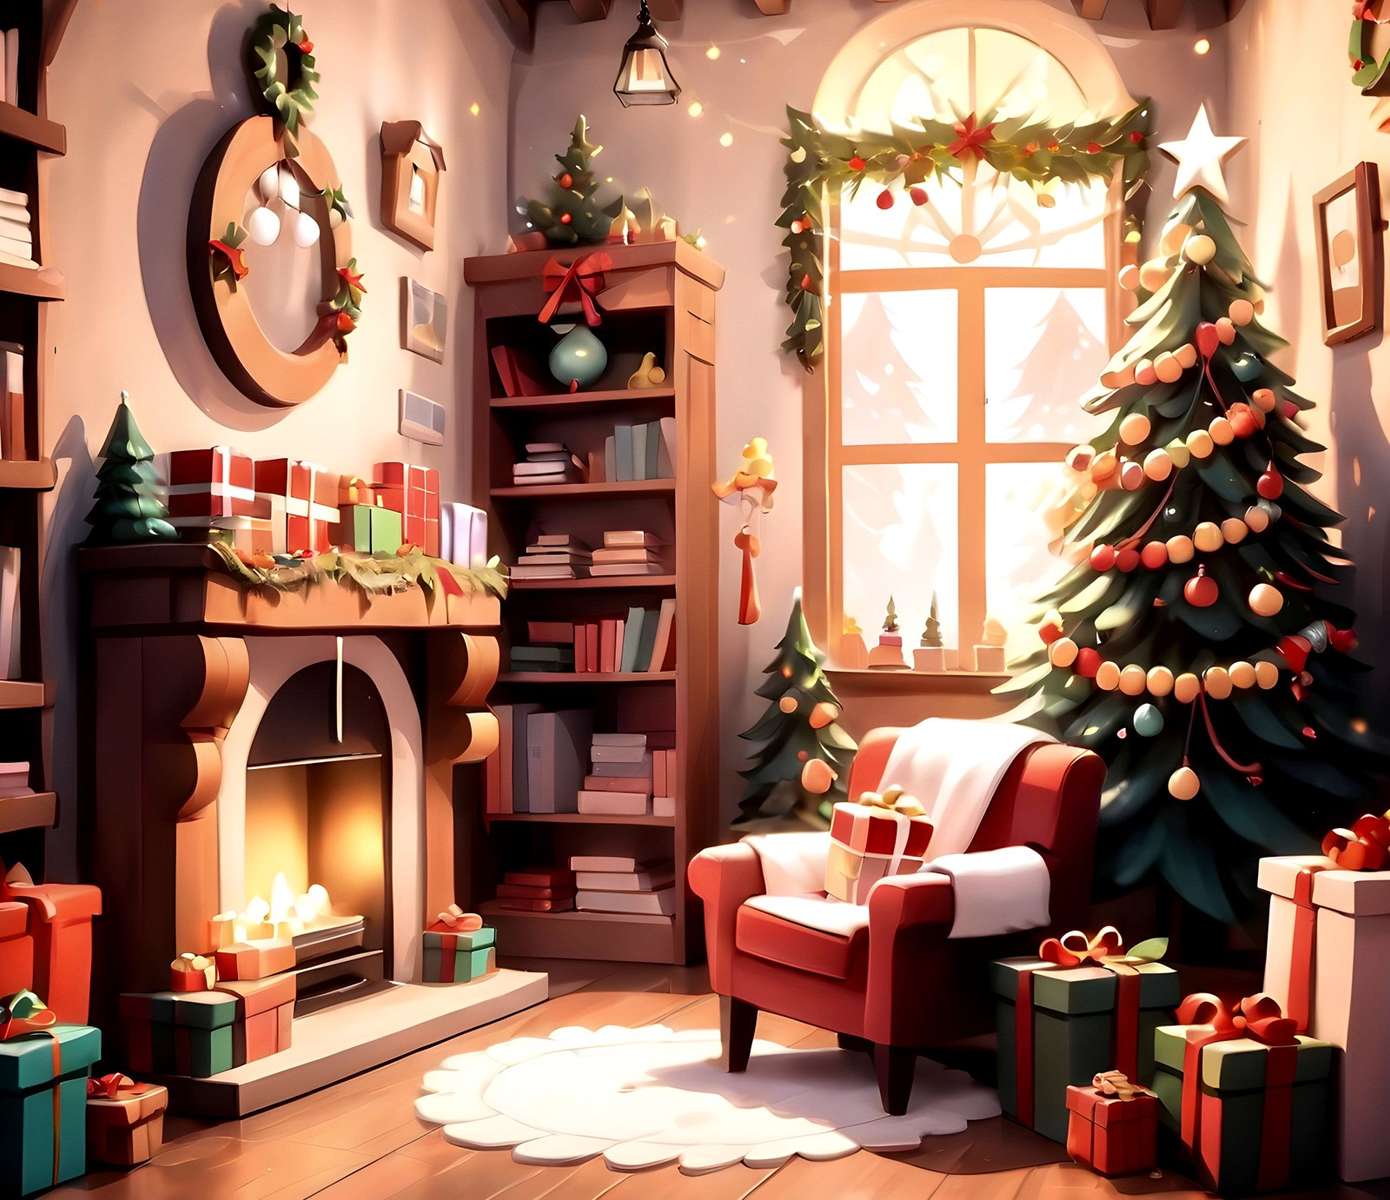 The Christmas tree is decorated, the gifts are wrapped online puzzle